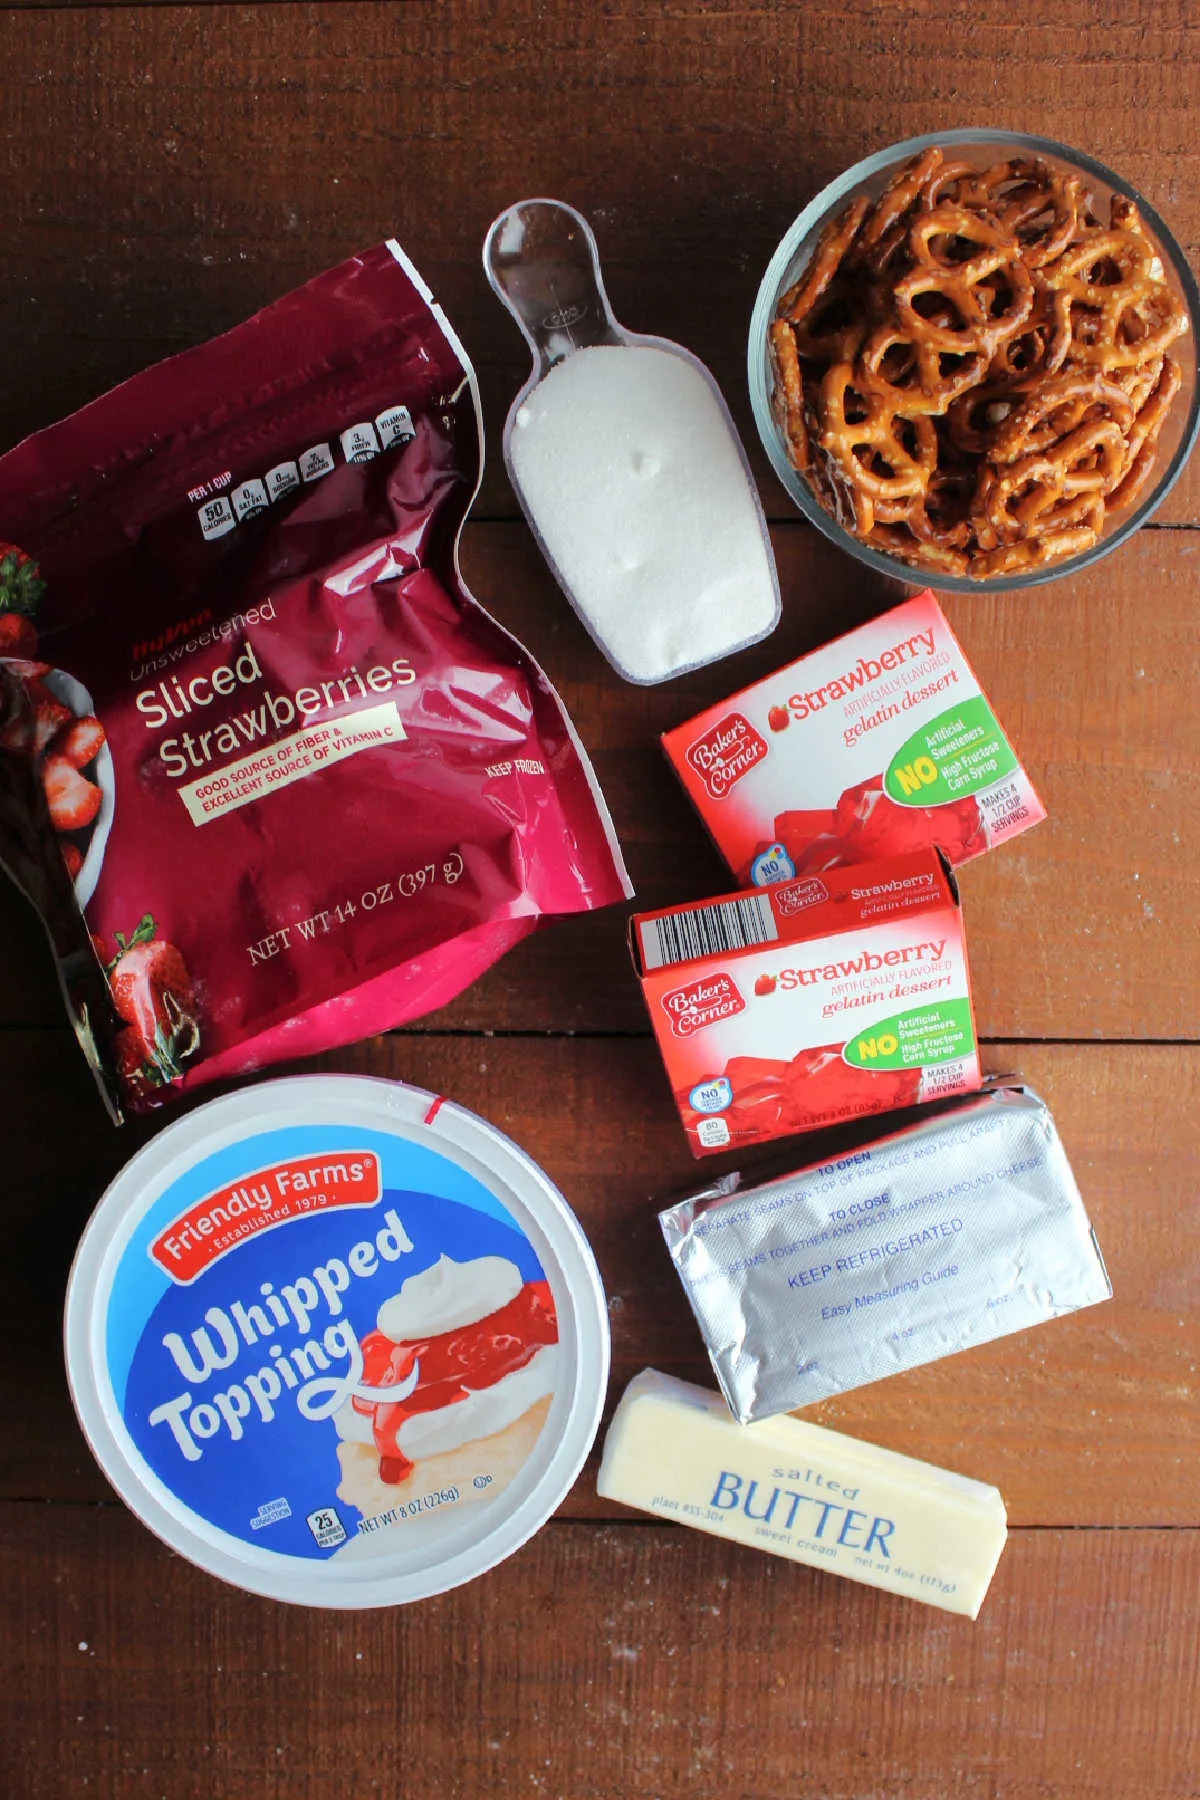 Ingredients including pretzels, sugar, butter, strawberry jello, frozen sliced strawberries, and whipped topping ready to be made into strawberry pretzel dessert.